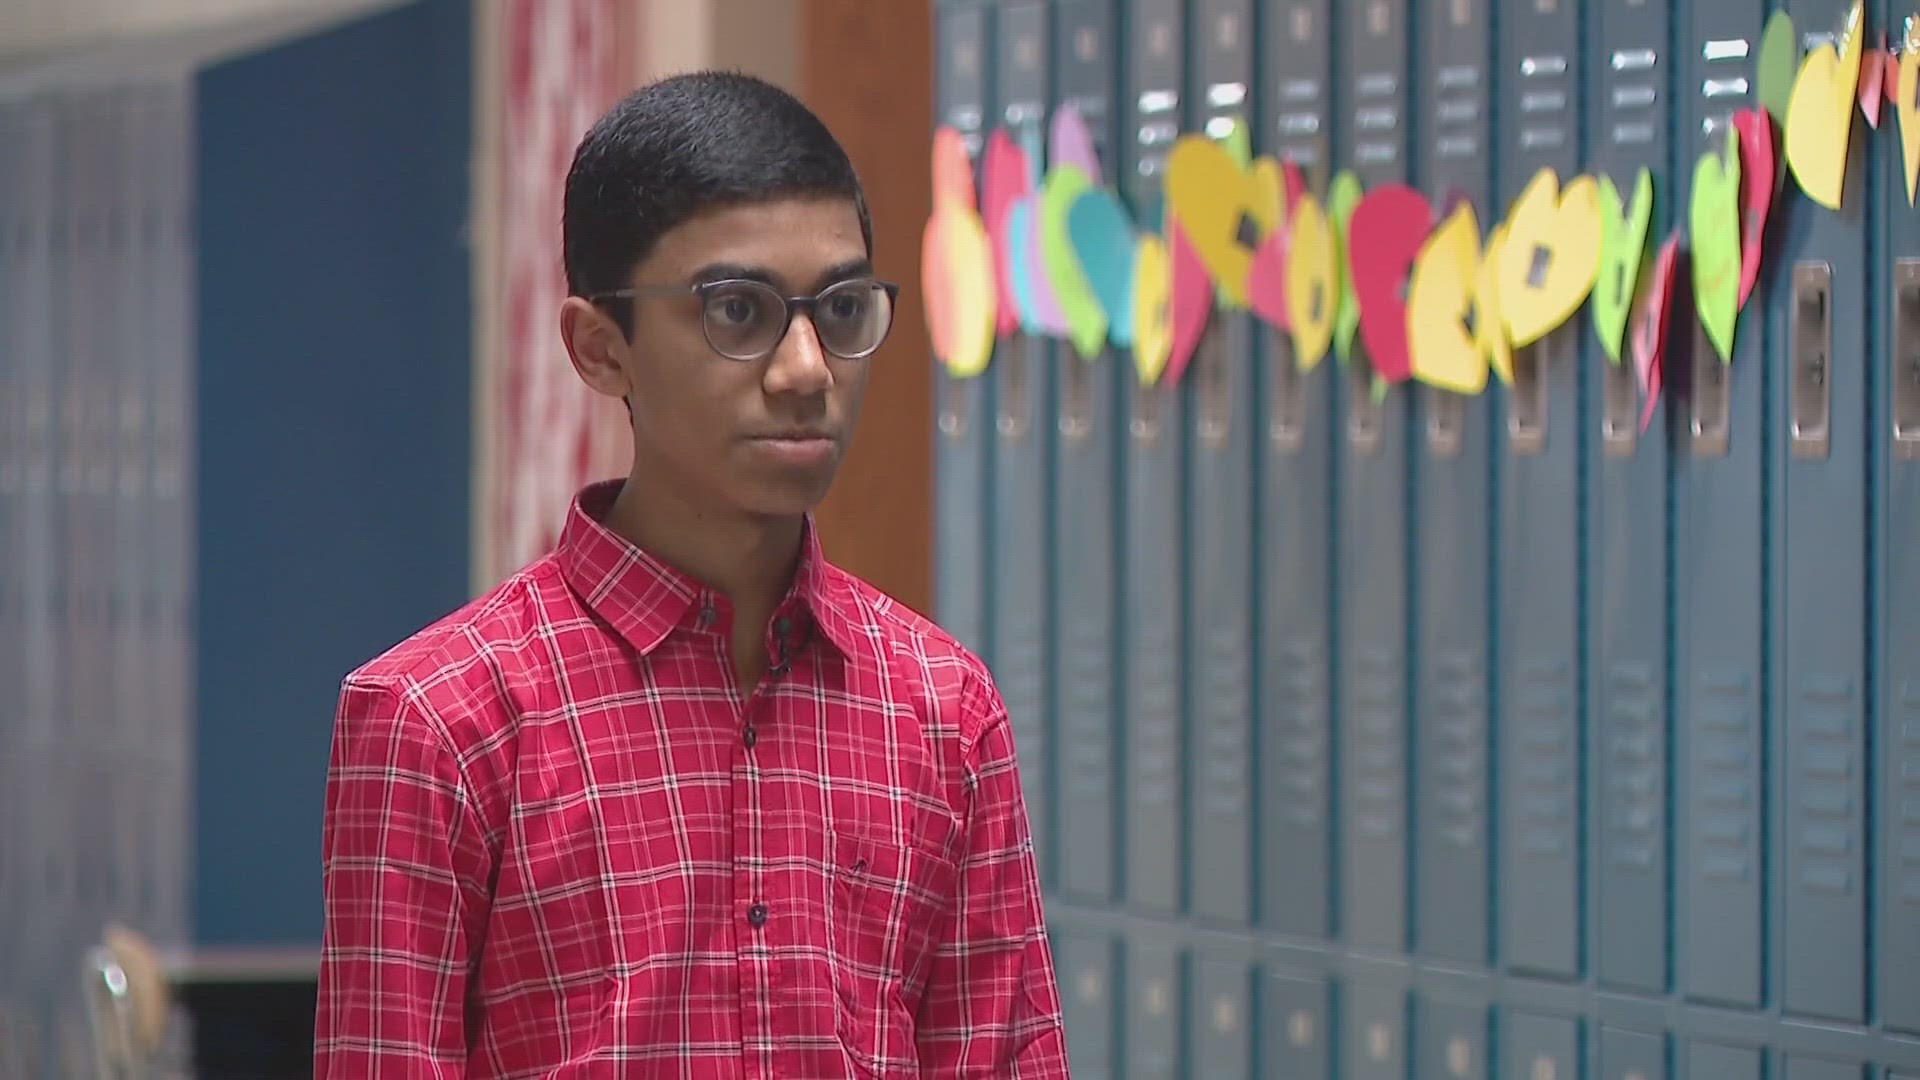 Benjamin Kurian is a student at Olentangy Liberty Middle School. He won the award for raising awareness of the importance of career education in schools.